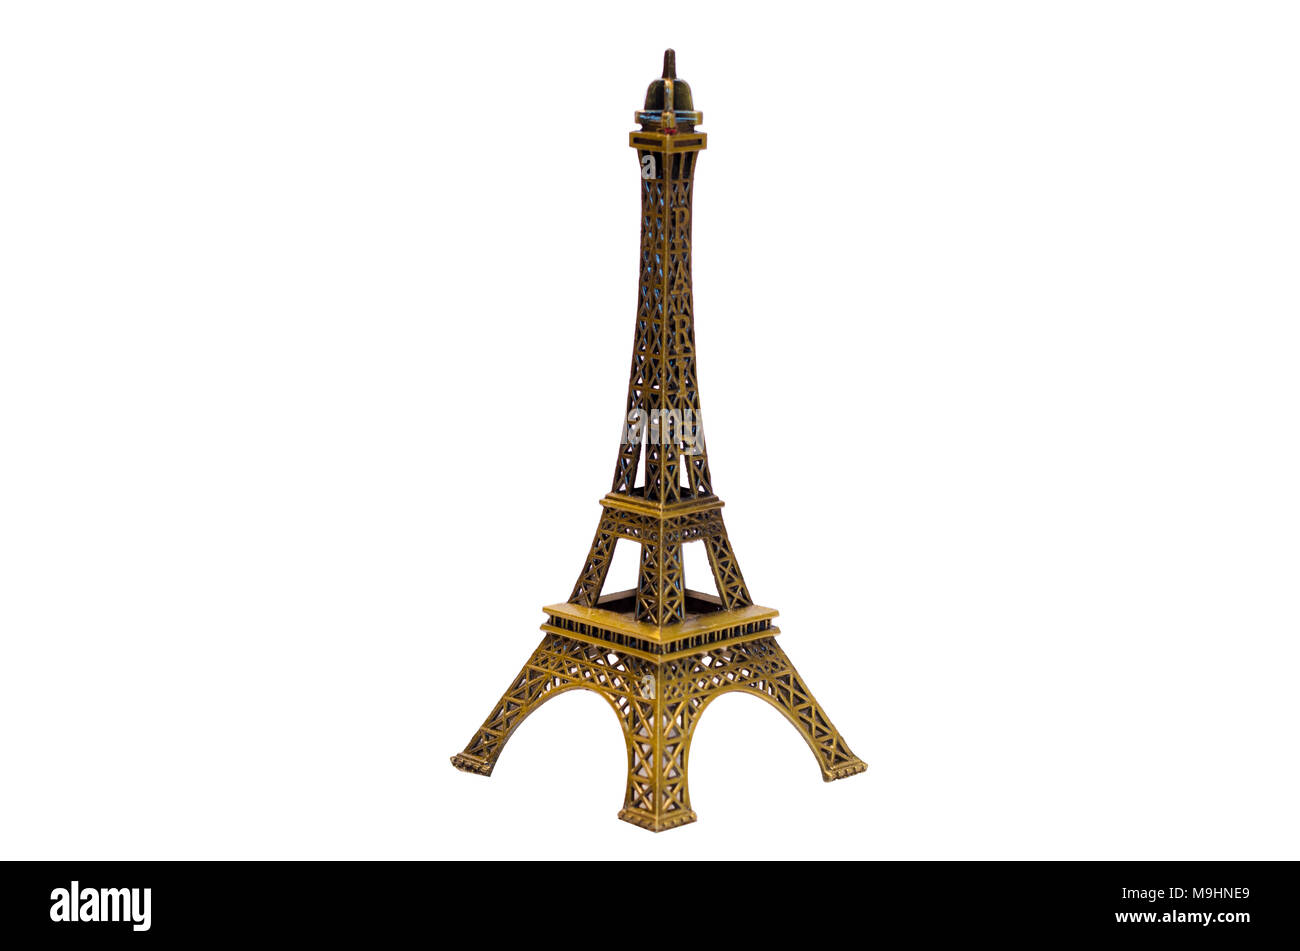 Eiffel tower isolated on white background Eiffel Tower Model Isolate Stock Photo